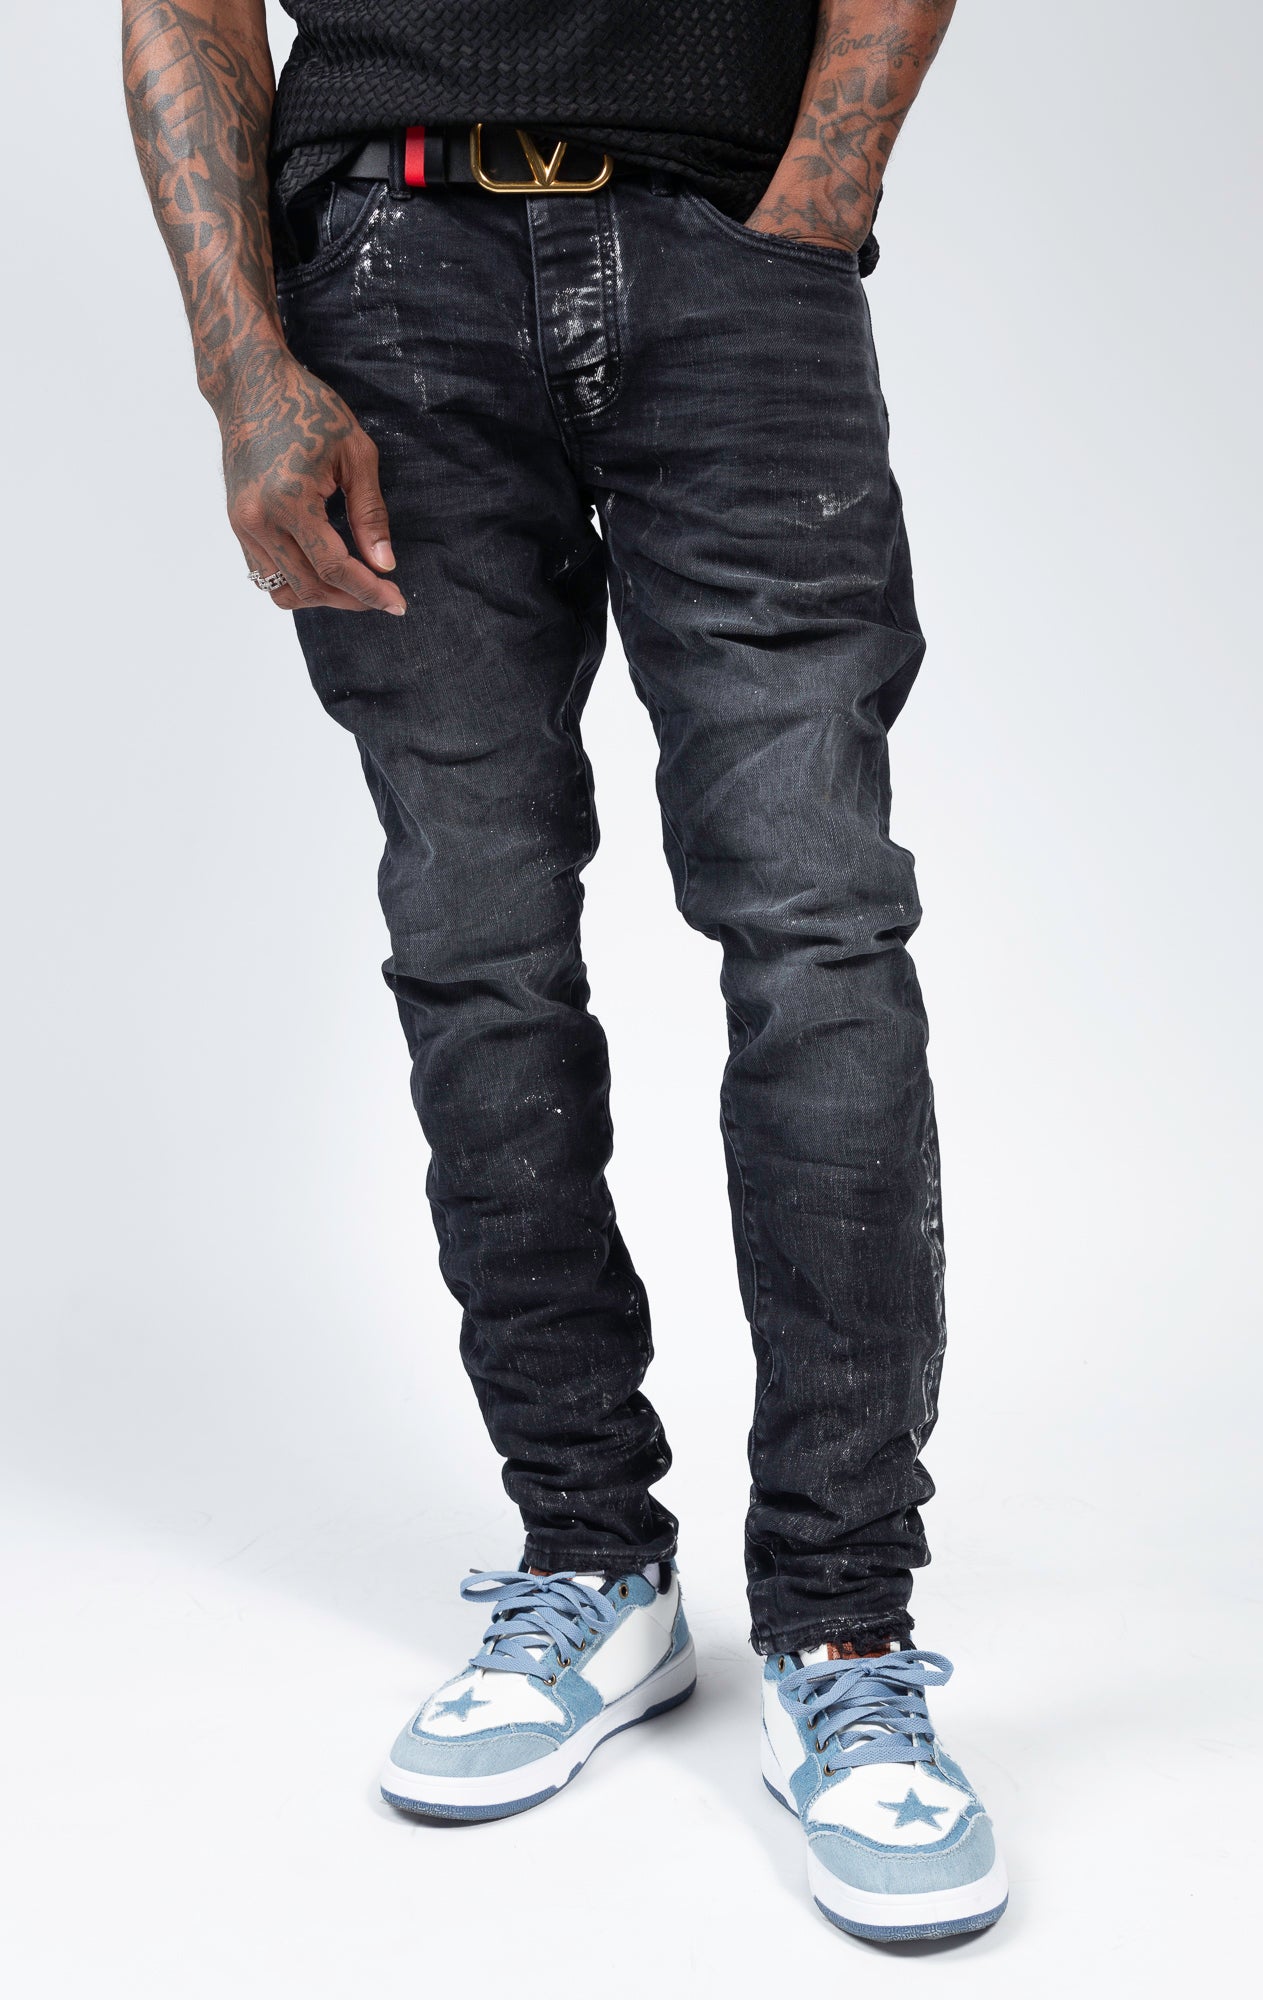 These jeans feature mid-rise comfort, slim-fit and a faded finish.